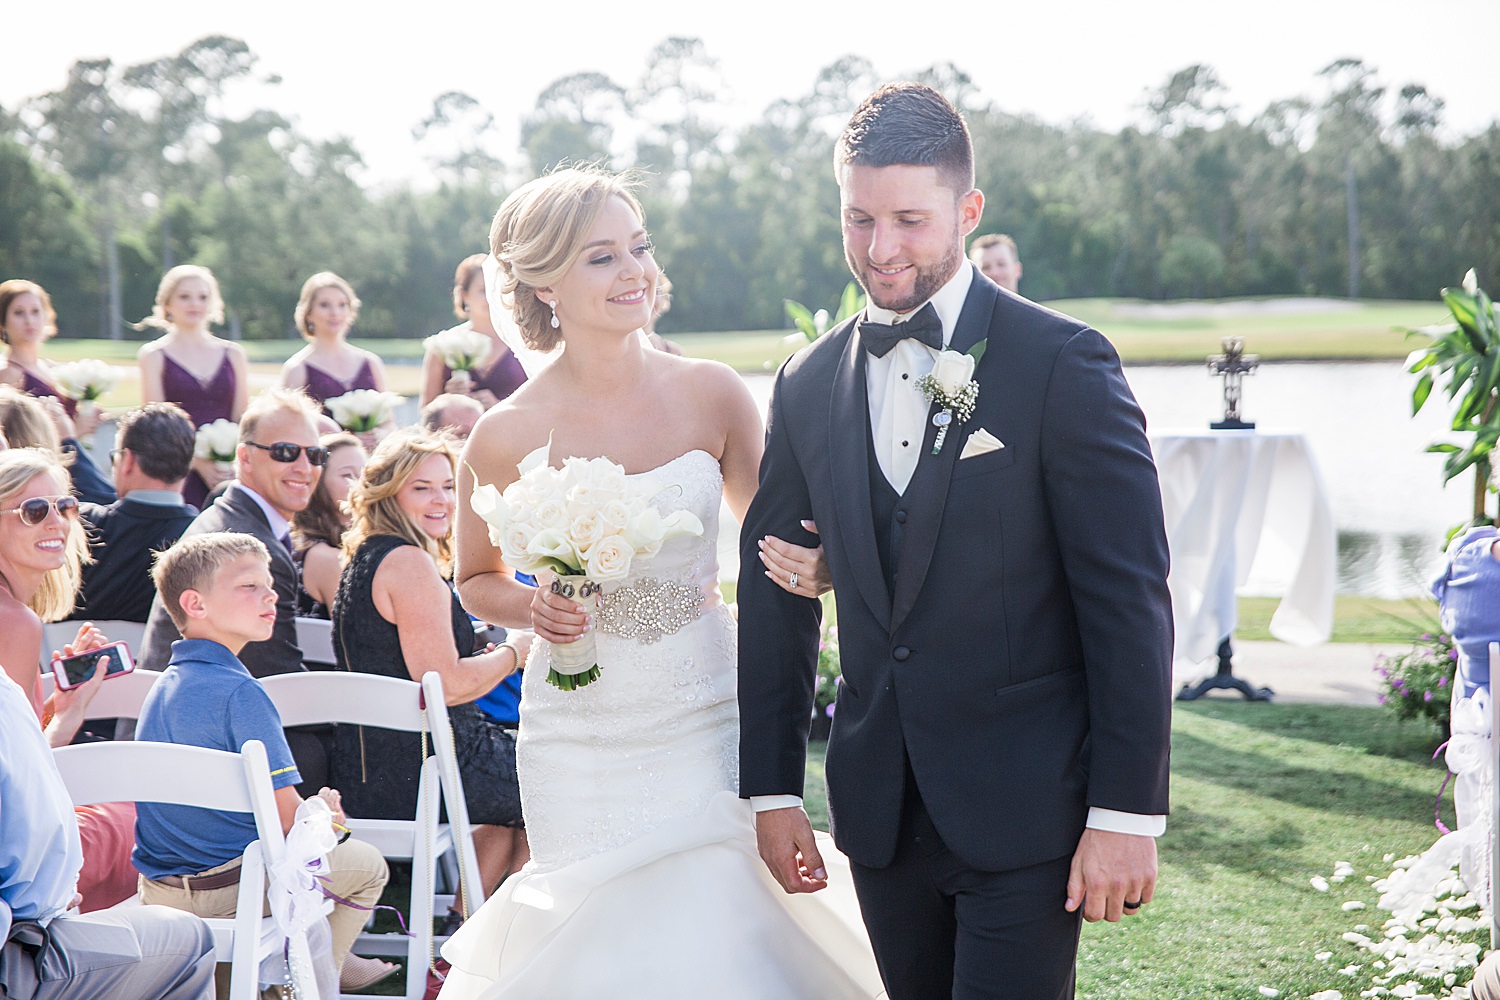 Bride smiles at her groom as they are announced husband and wife